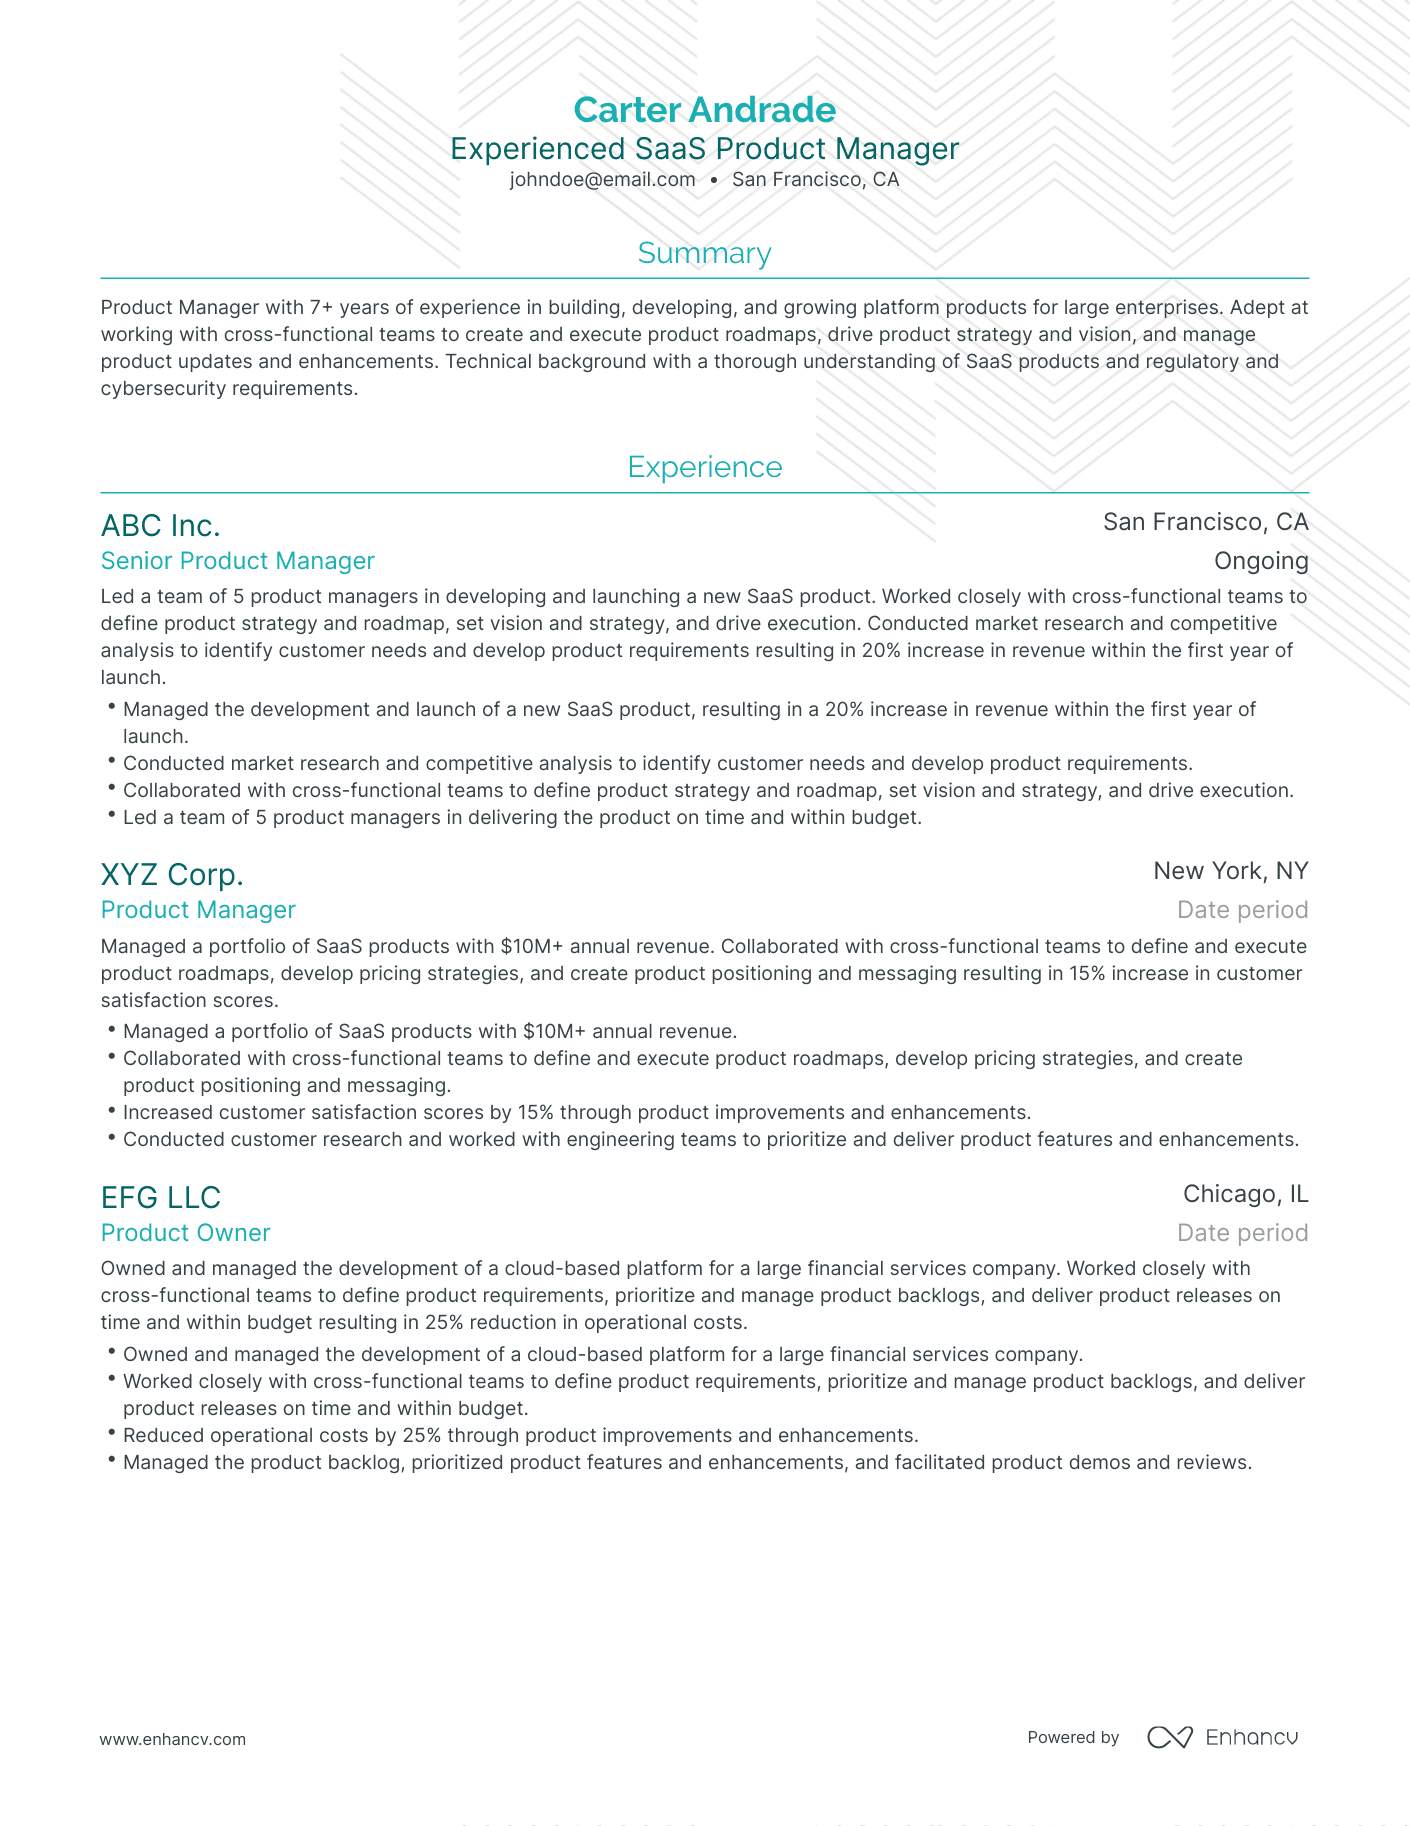 Traditional SaaS Product Manager Resume Template